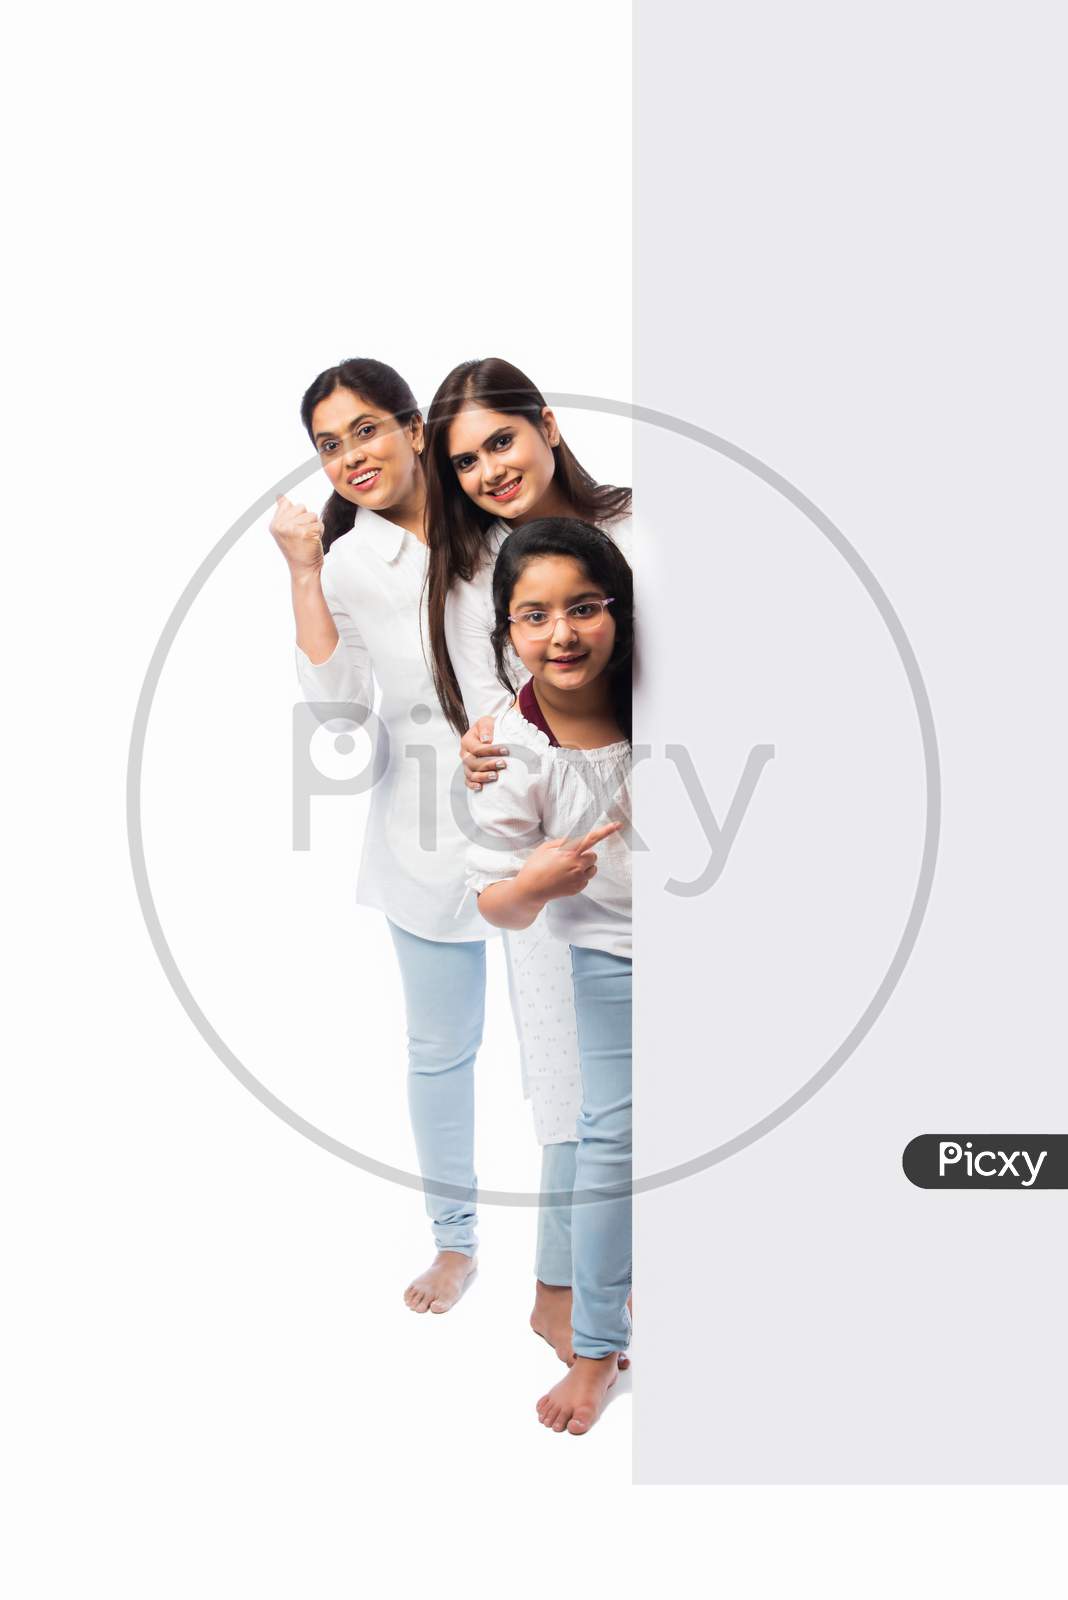 Indian Happy Family Holding Or Presenting White Board, Wall Or Placard